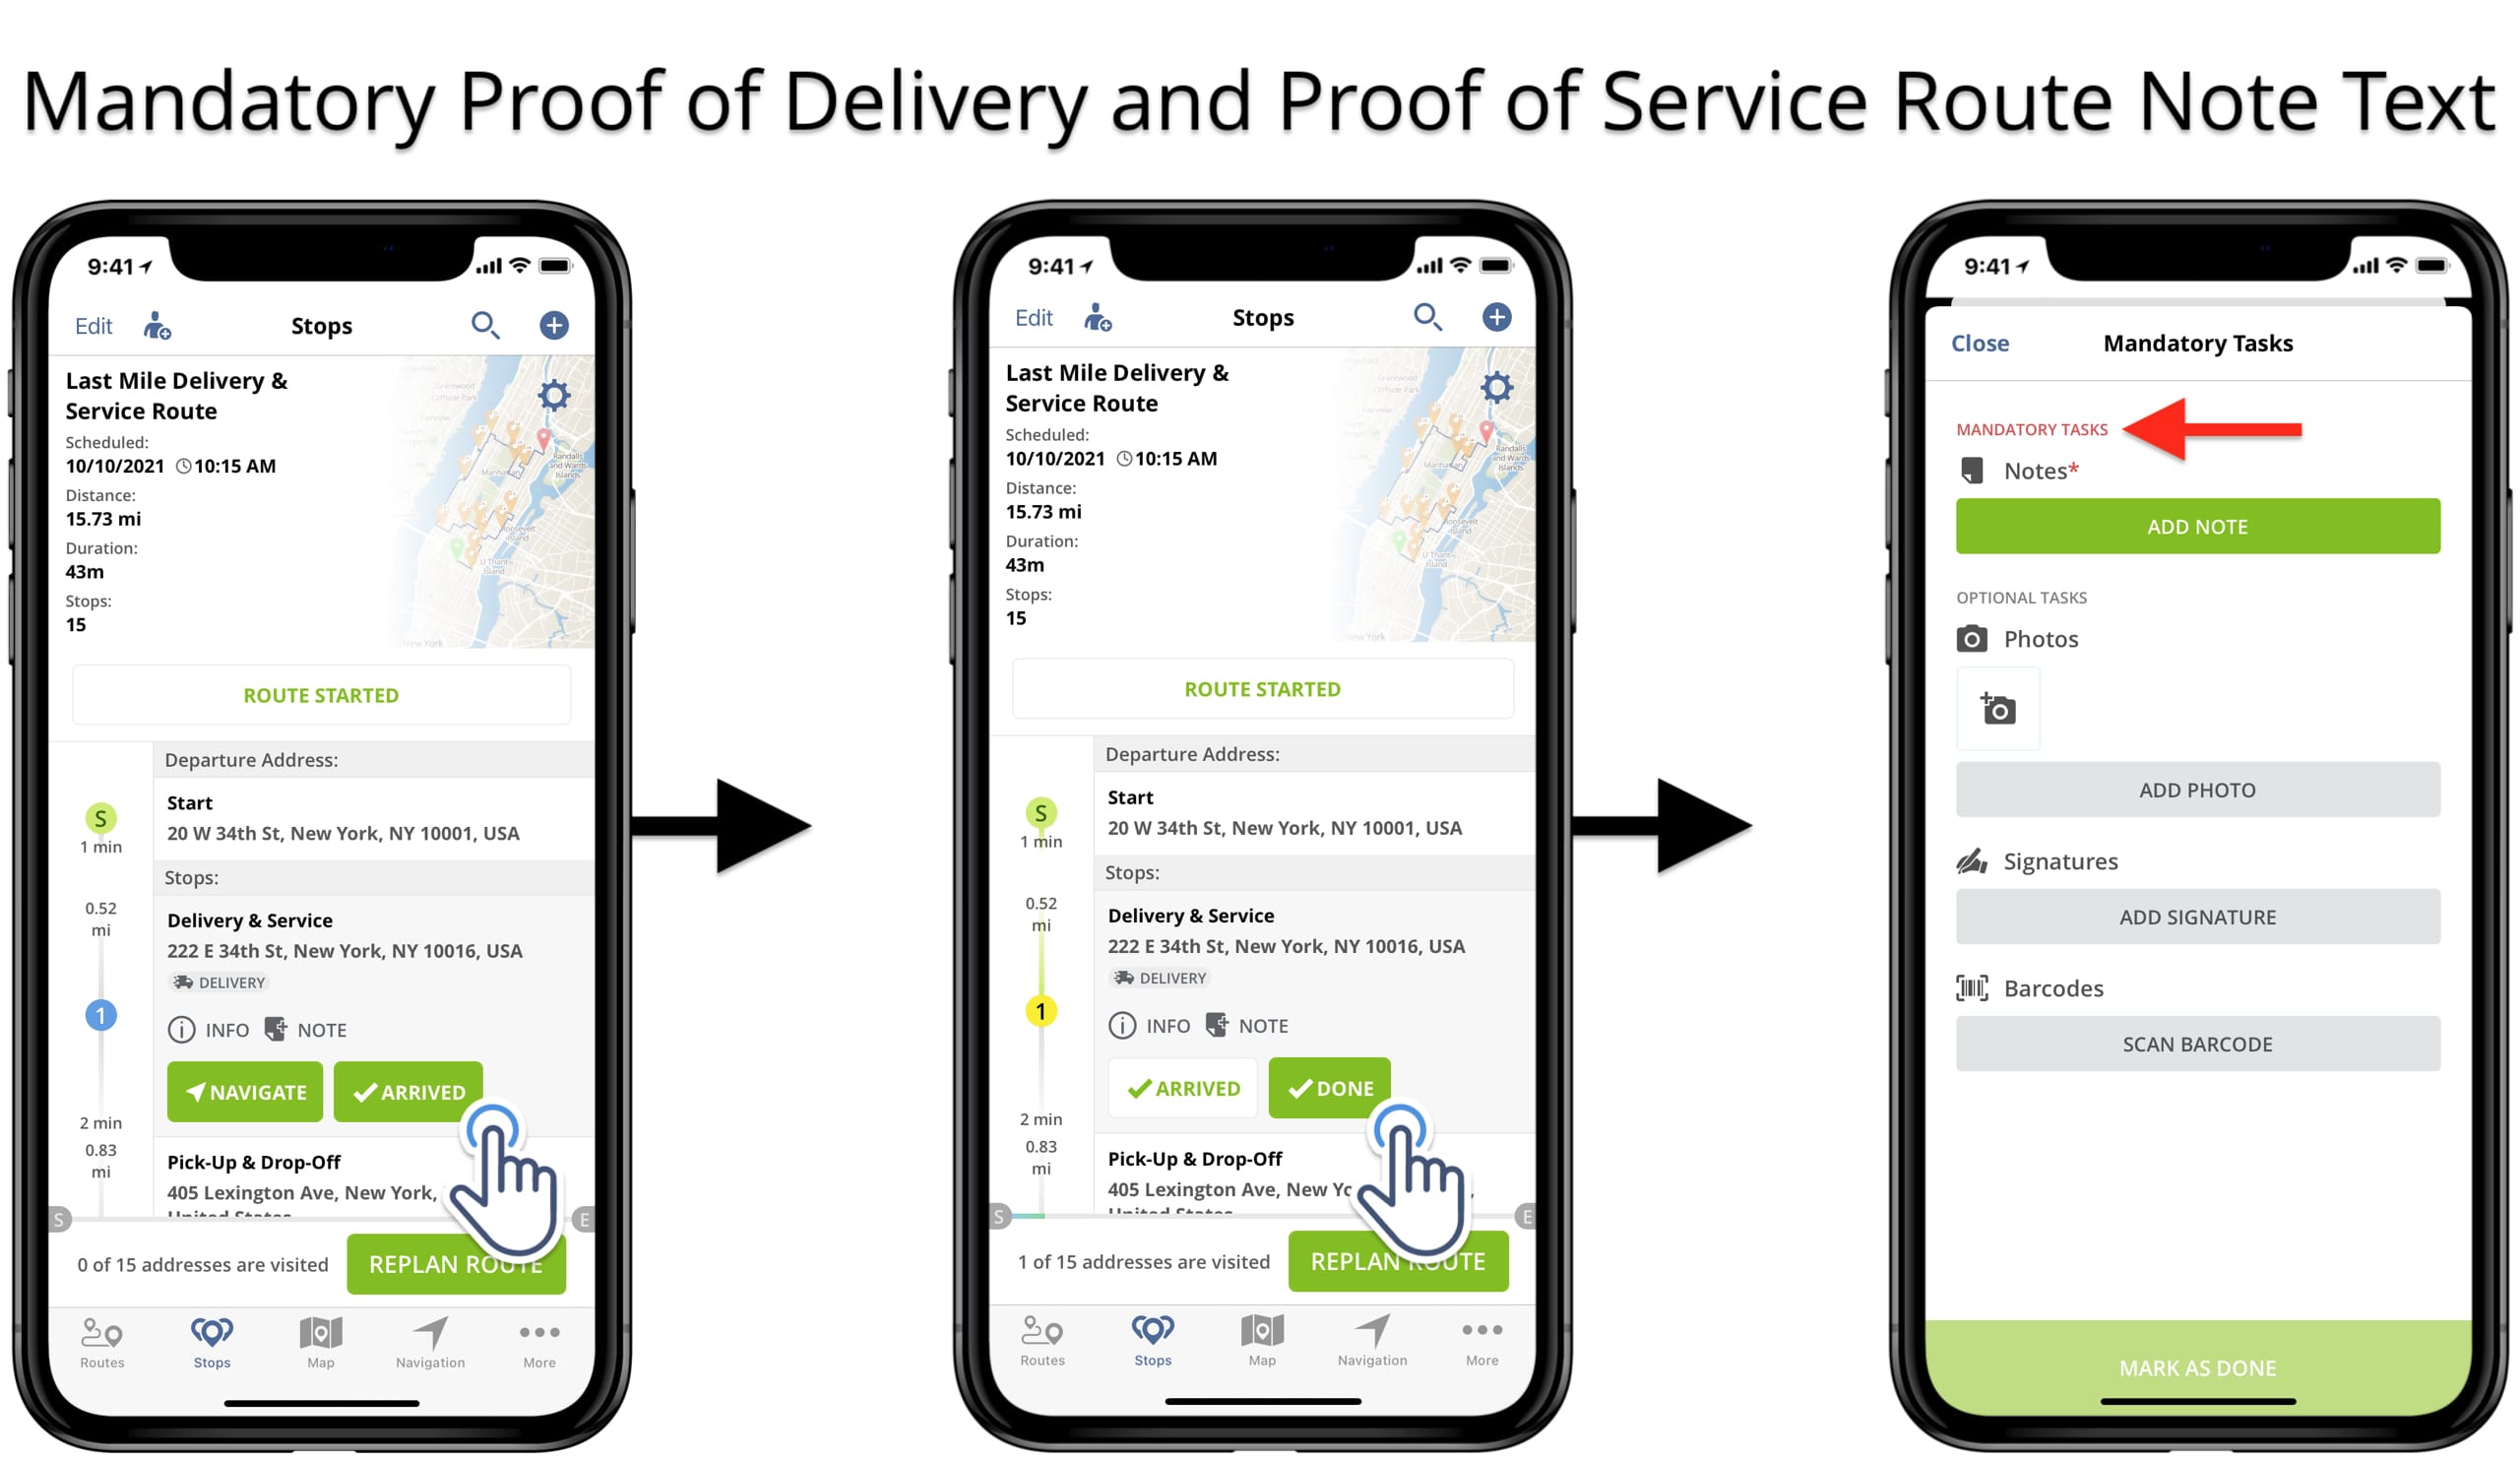 Mandatory route note attachment is required to complete orders and deliveries on iOS Route Planner.